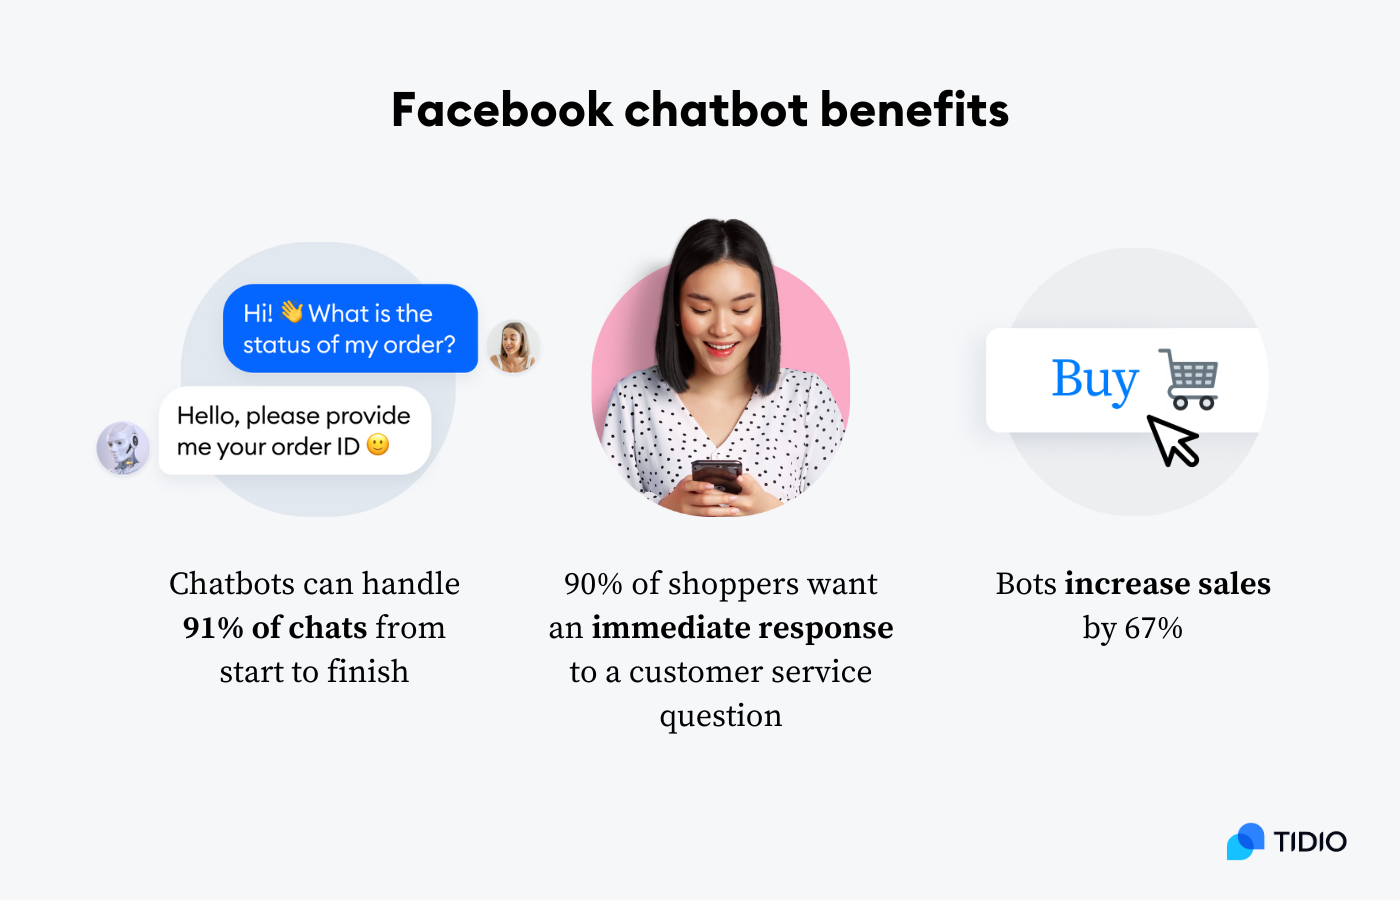 Benefits of a Facebook chatbot on image